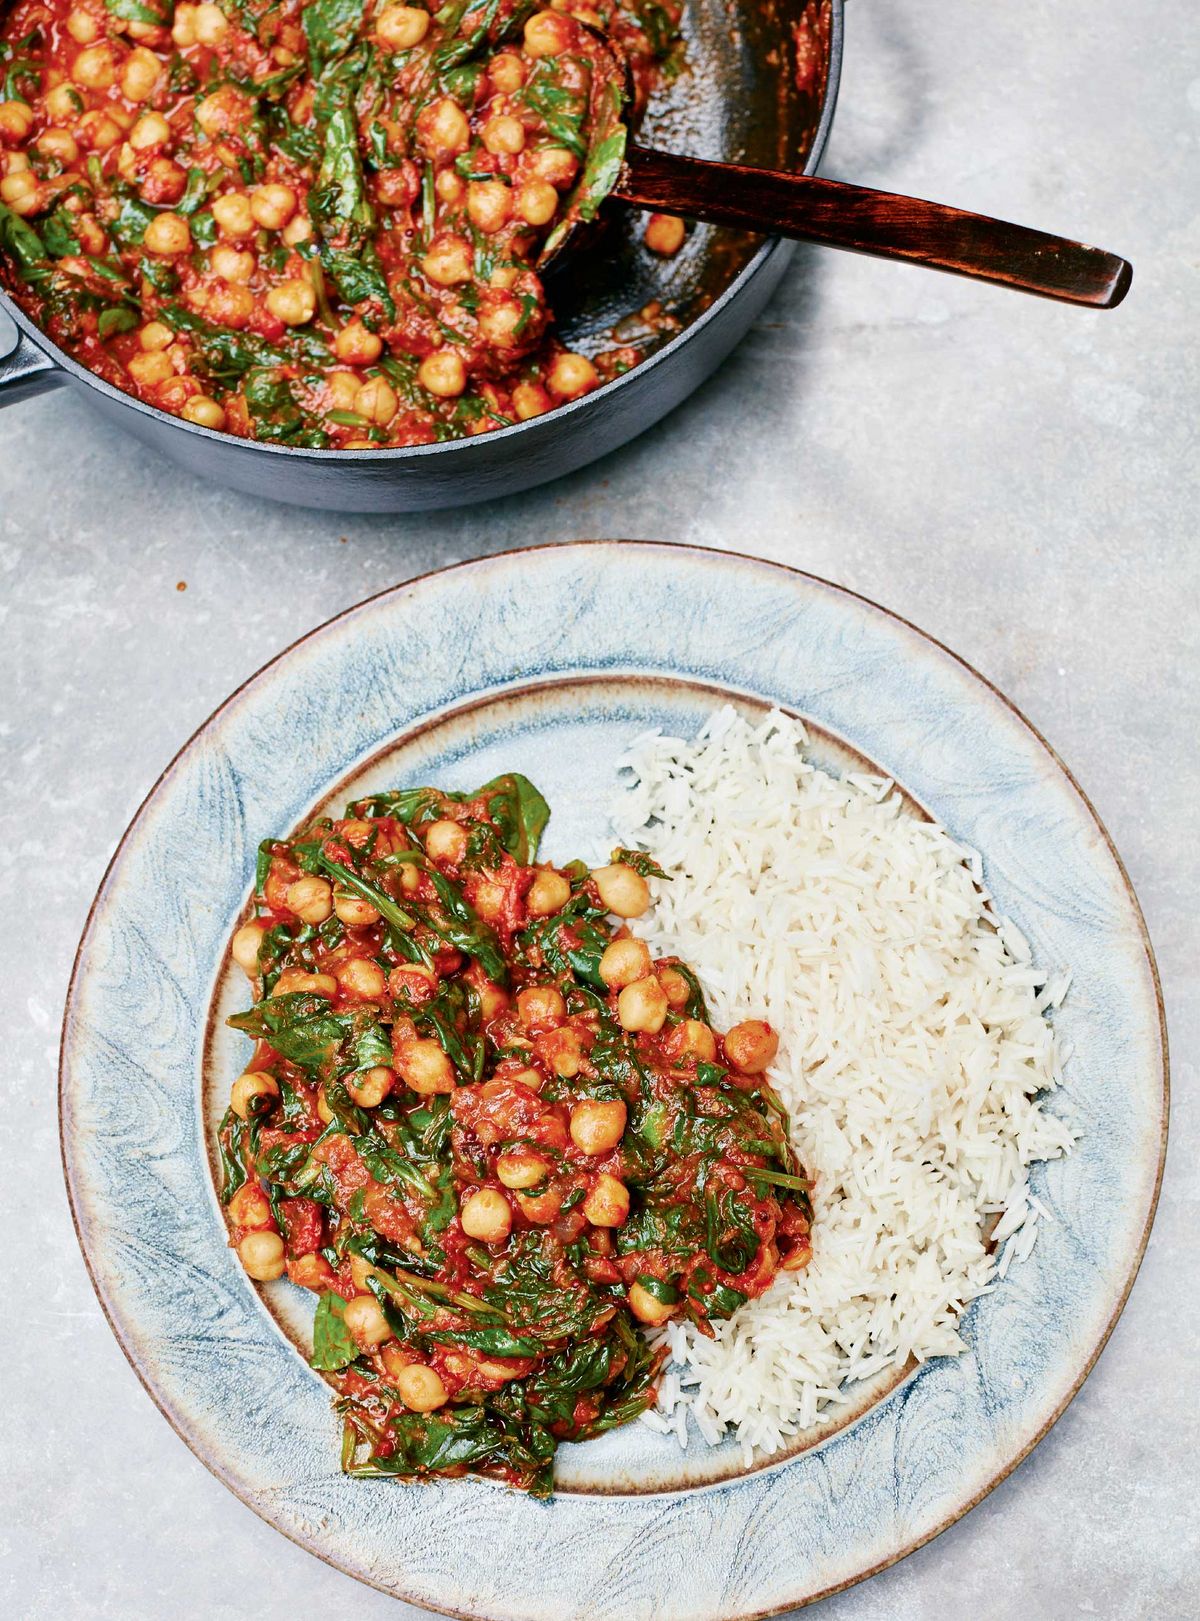 Meera Sodha’s Spinach, Tomato and Chickpea Curry